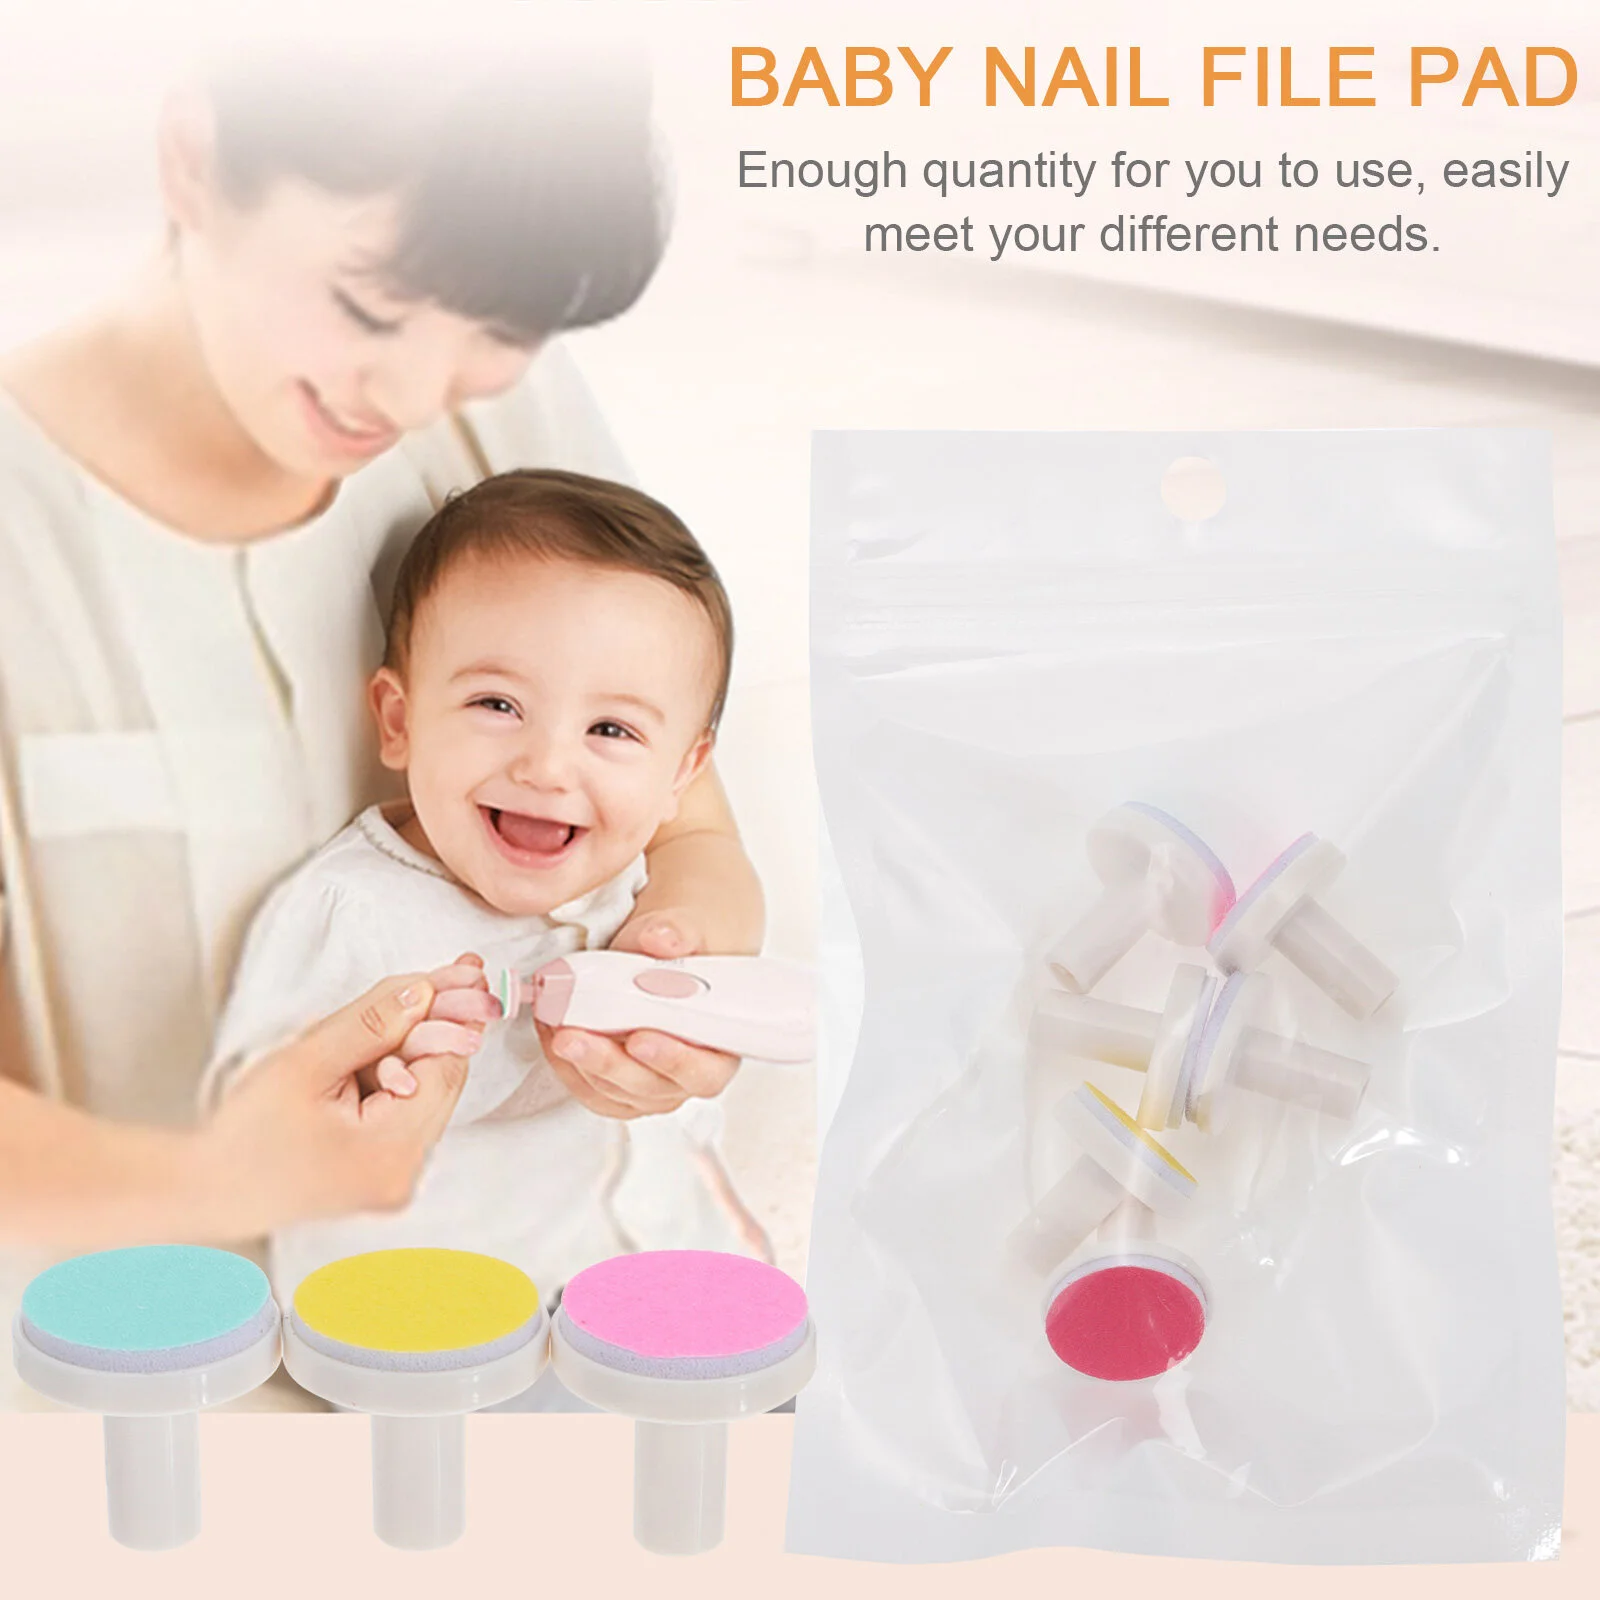 24 Pcs Grinding Head Baby Nail Trimmer Toddler File Pad Scissors Sandpaper Child images - 5